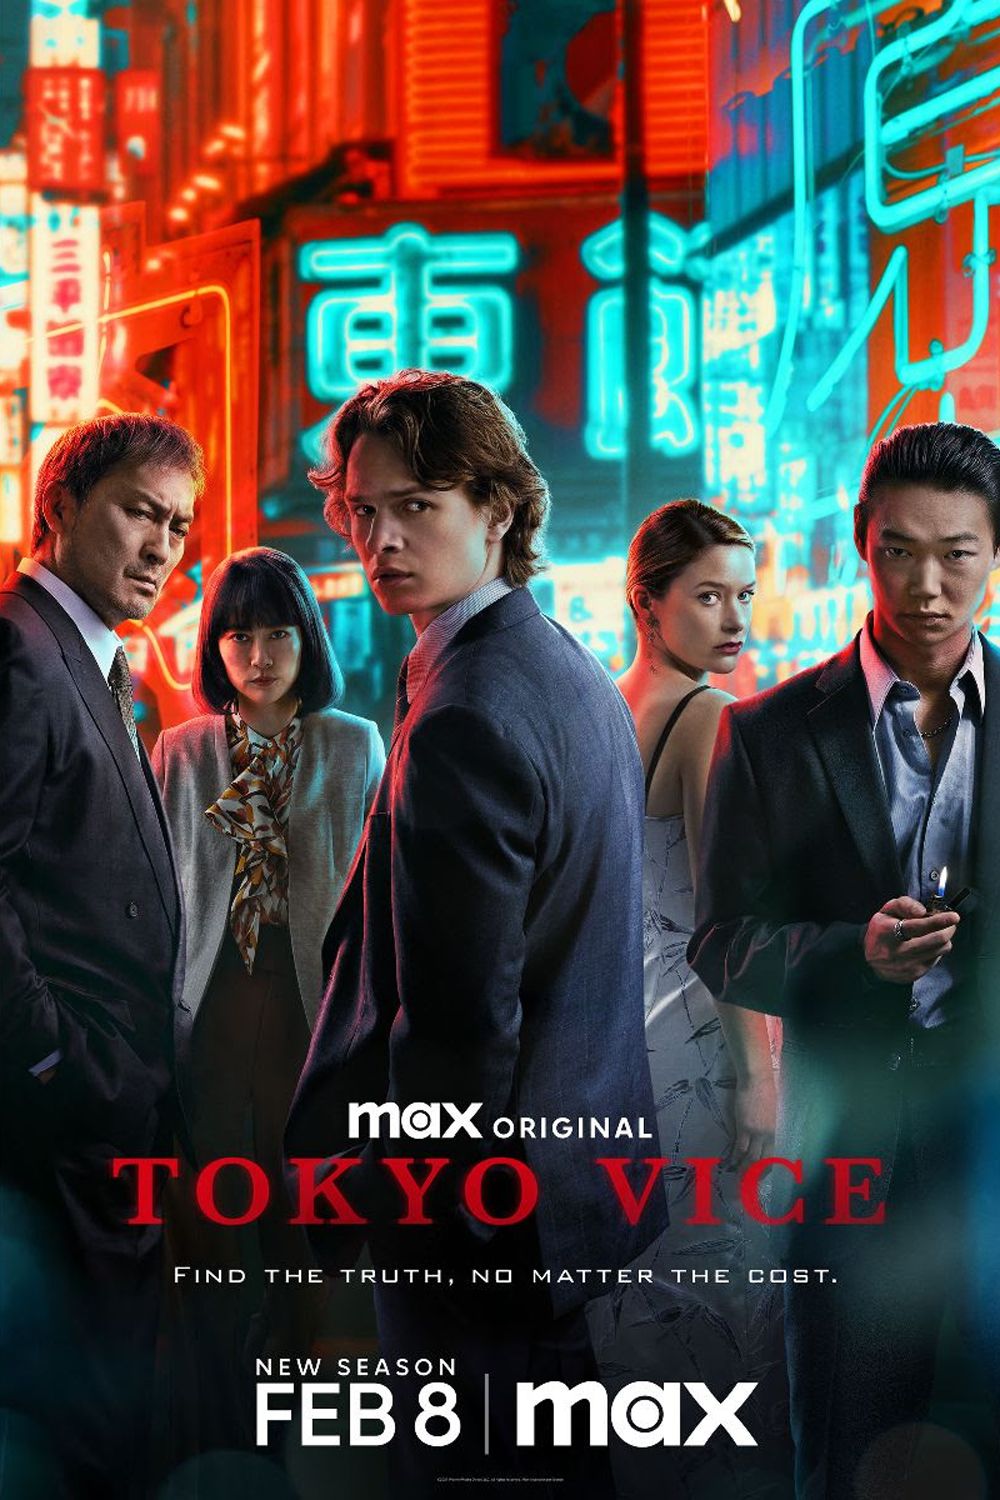 Tokyo Vice Season 2 Poster Featuring the Cast Standing in Front of Neon Lights